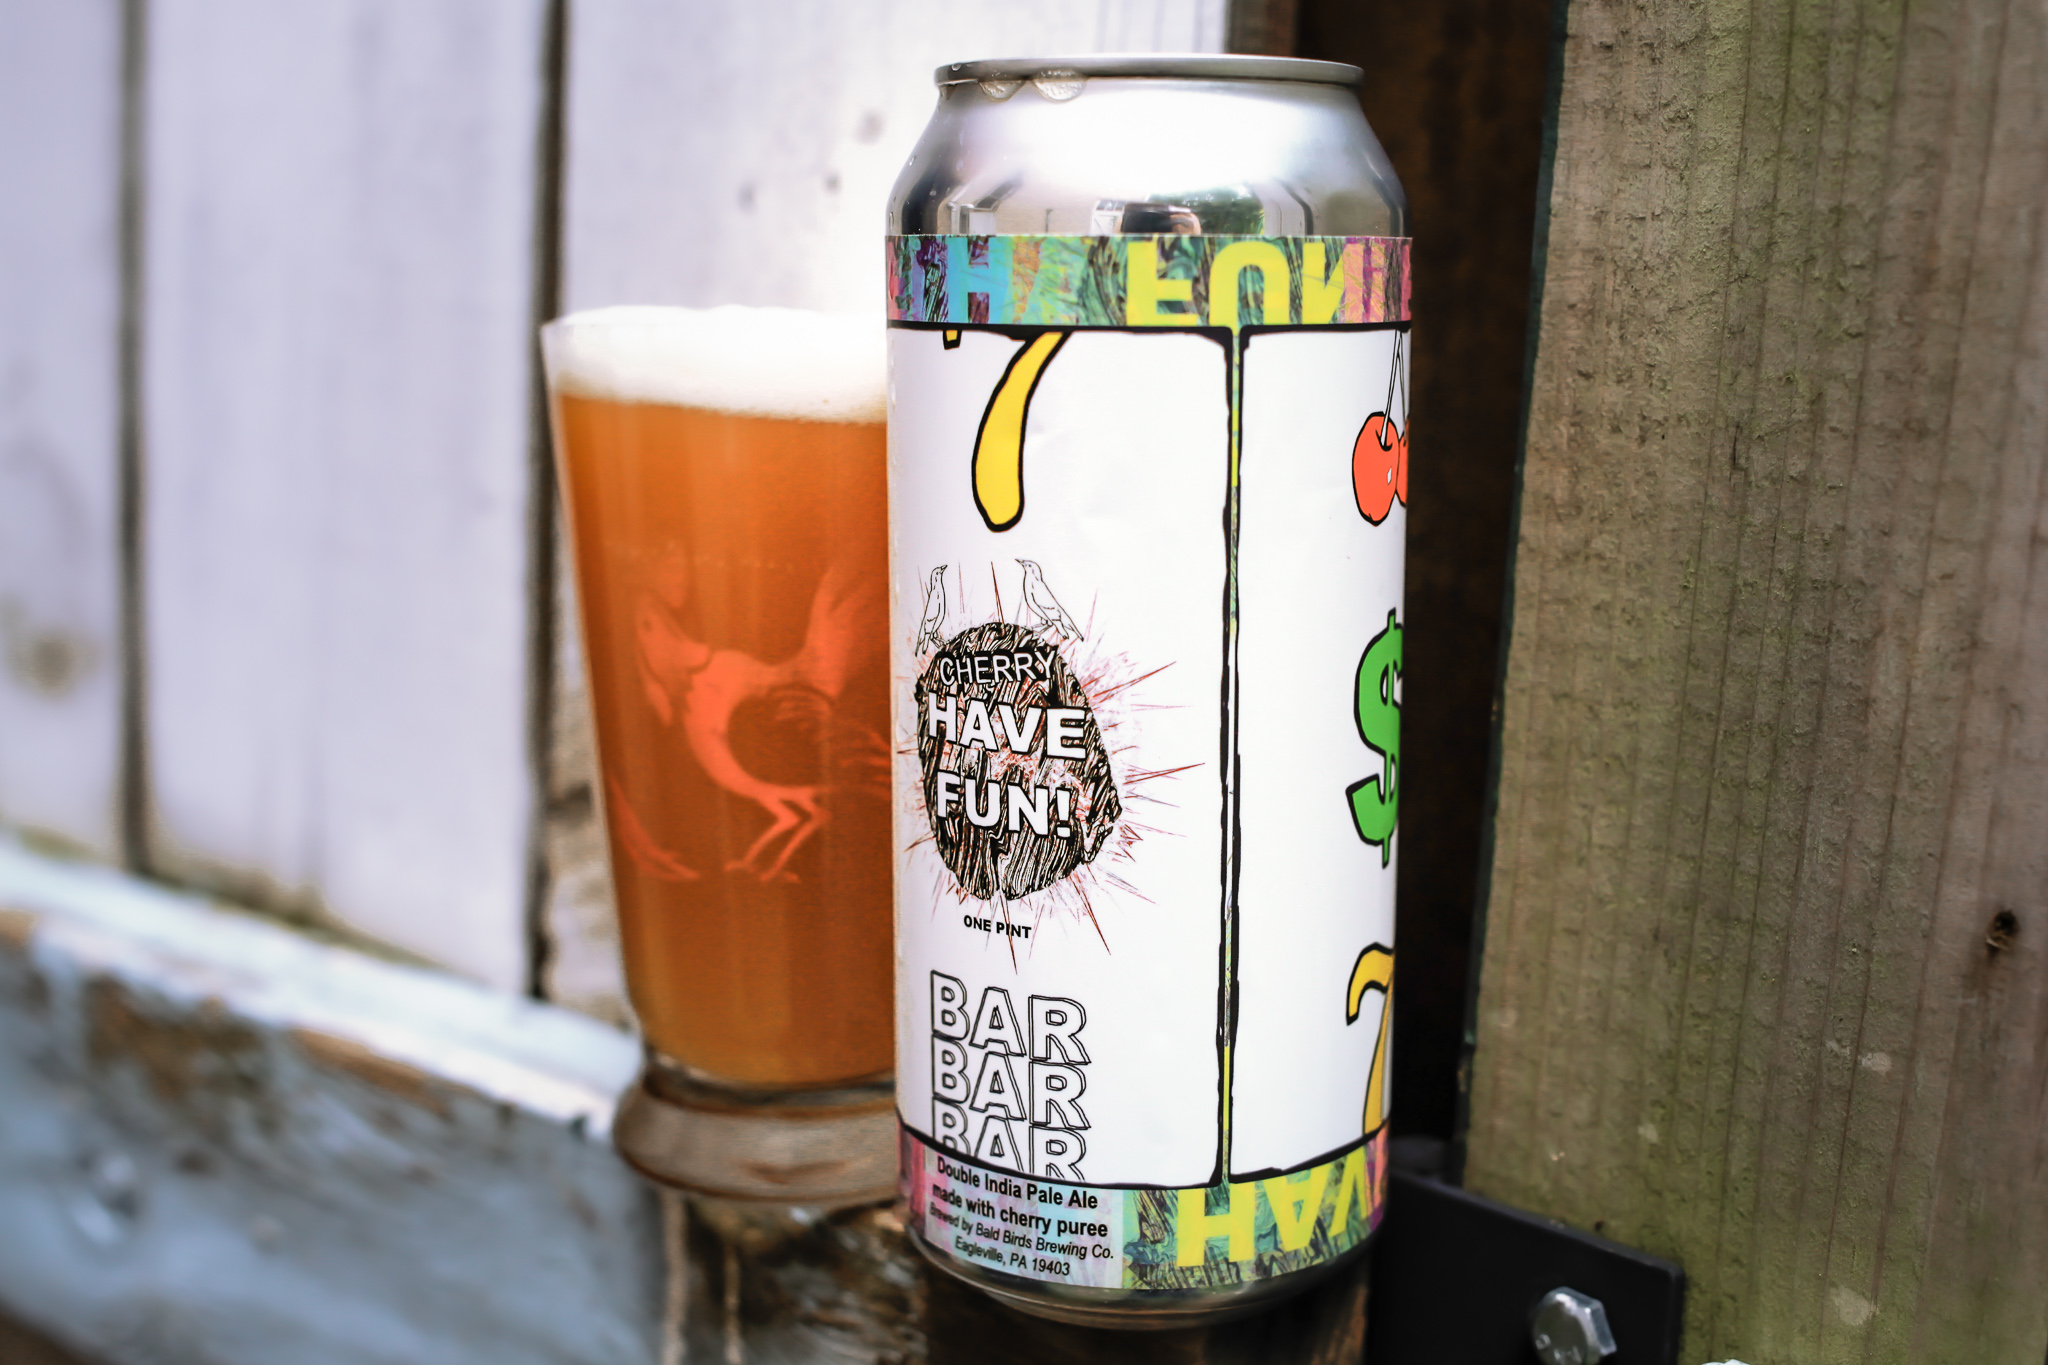 A 16 ounce beer can with a label displaying the title "Have fun" and drawings of a casino slot machine sits next to a glass of hazy IPA along a wooden fence.